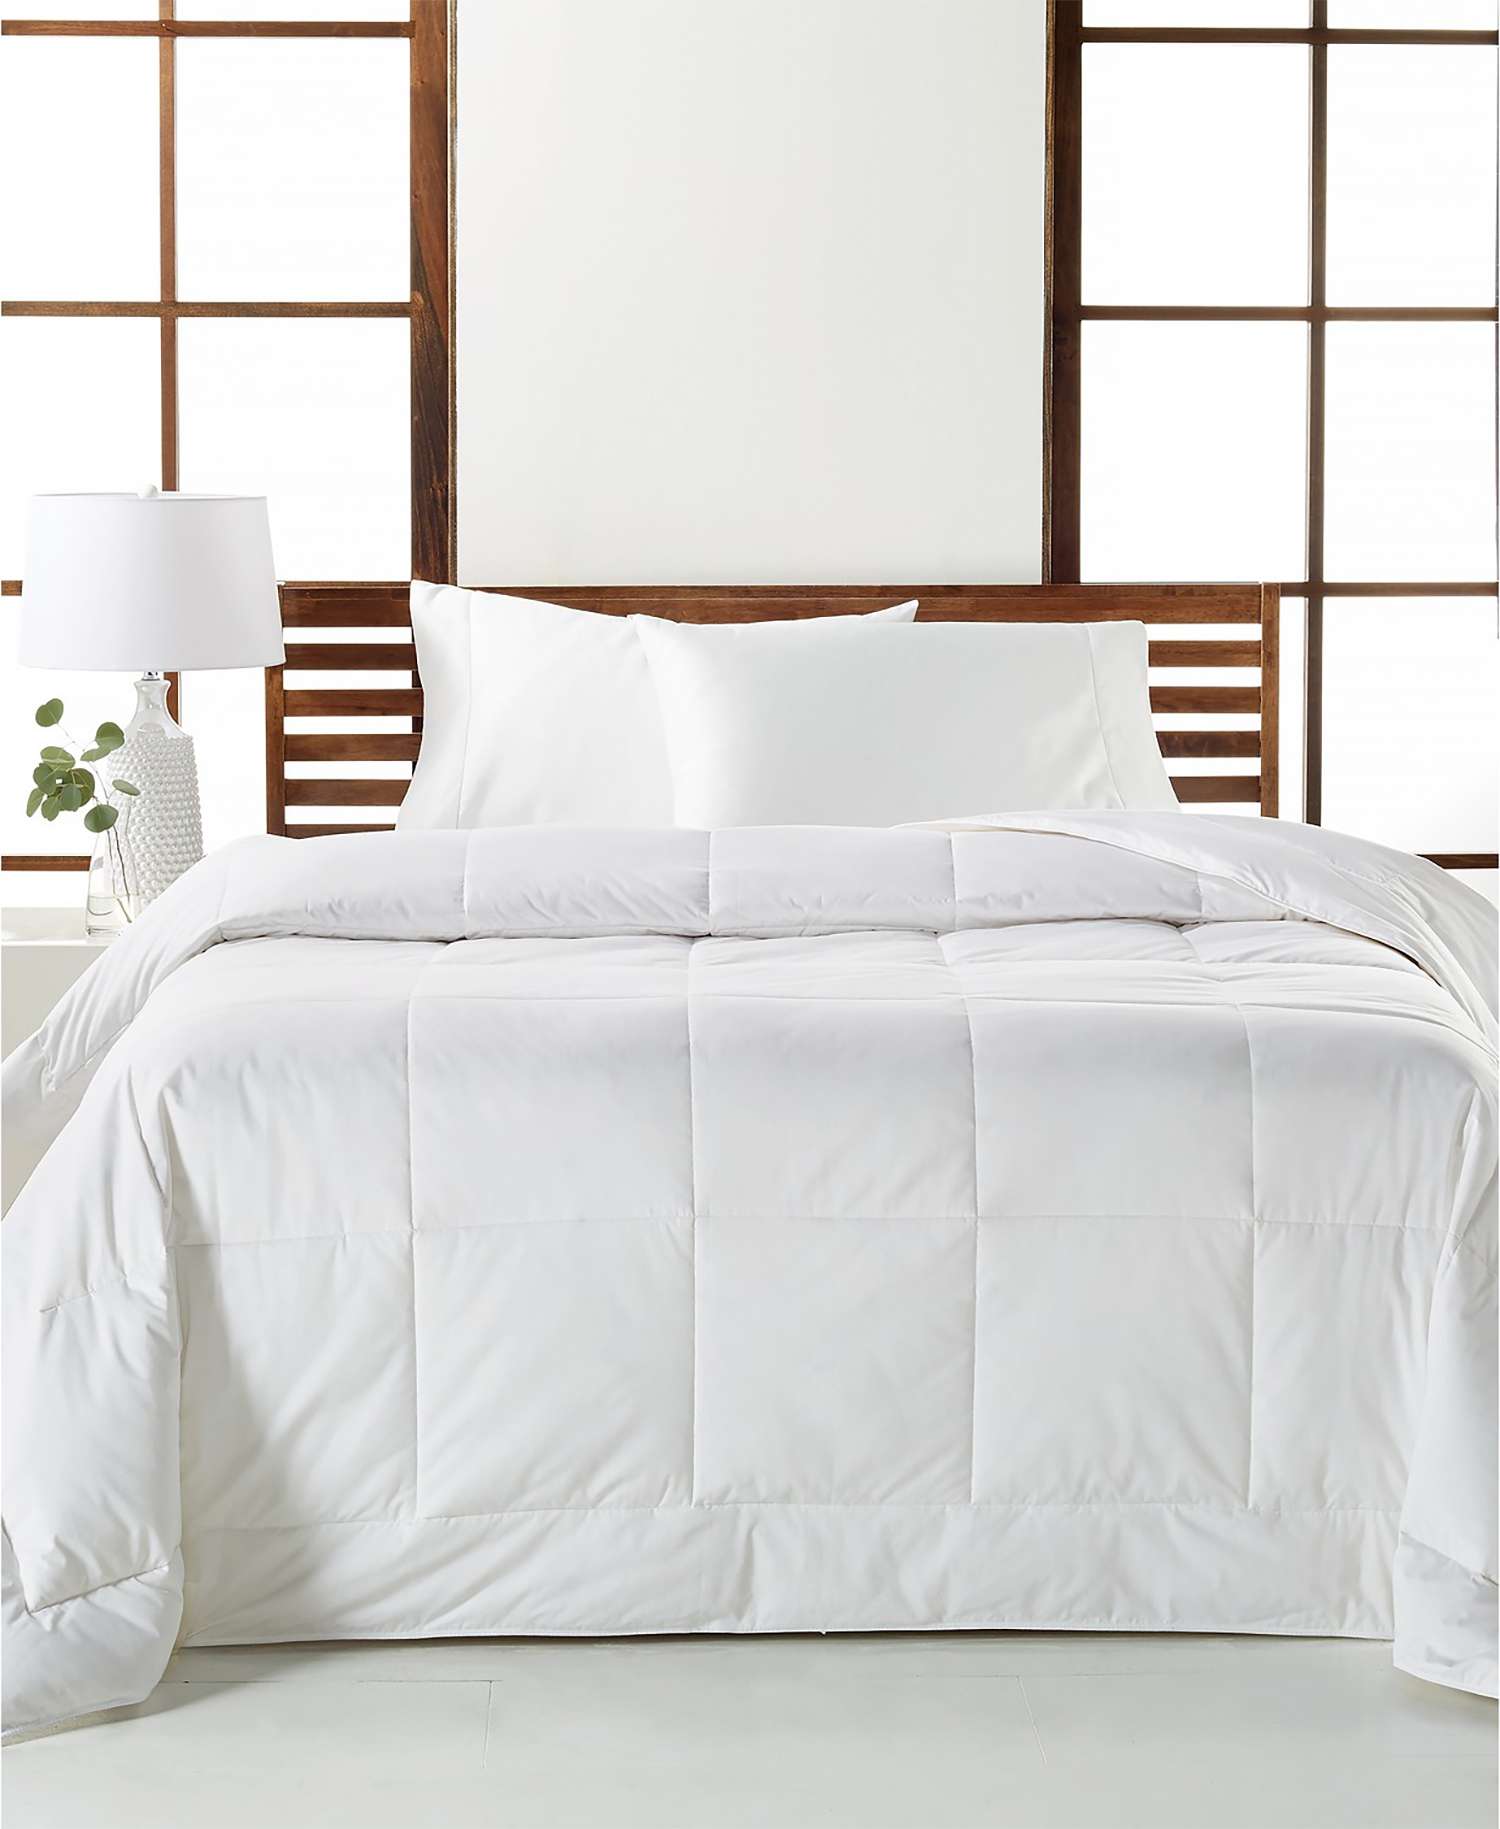 70 Off At Macy S Labor Day, Twin Duvet Covers Macys